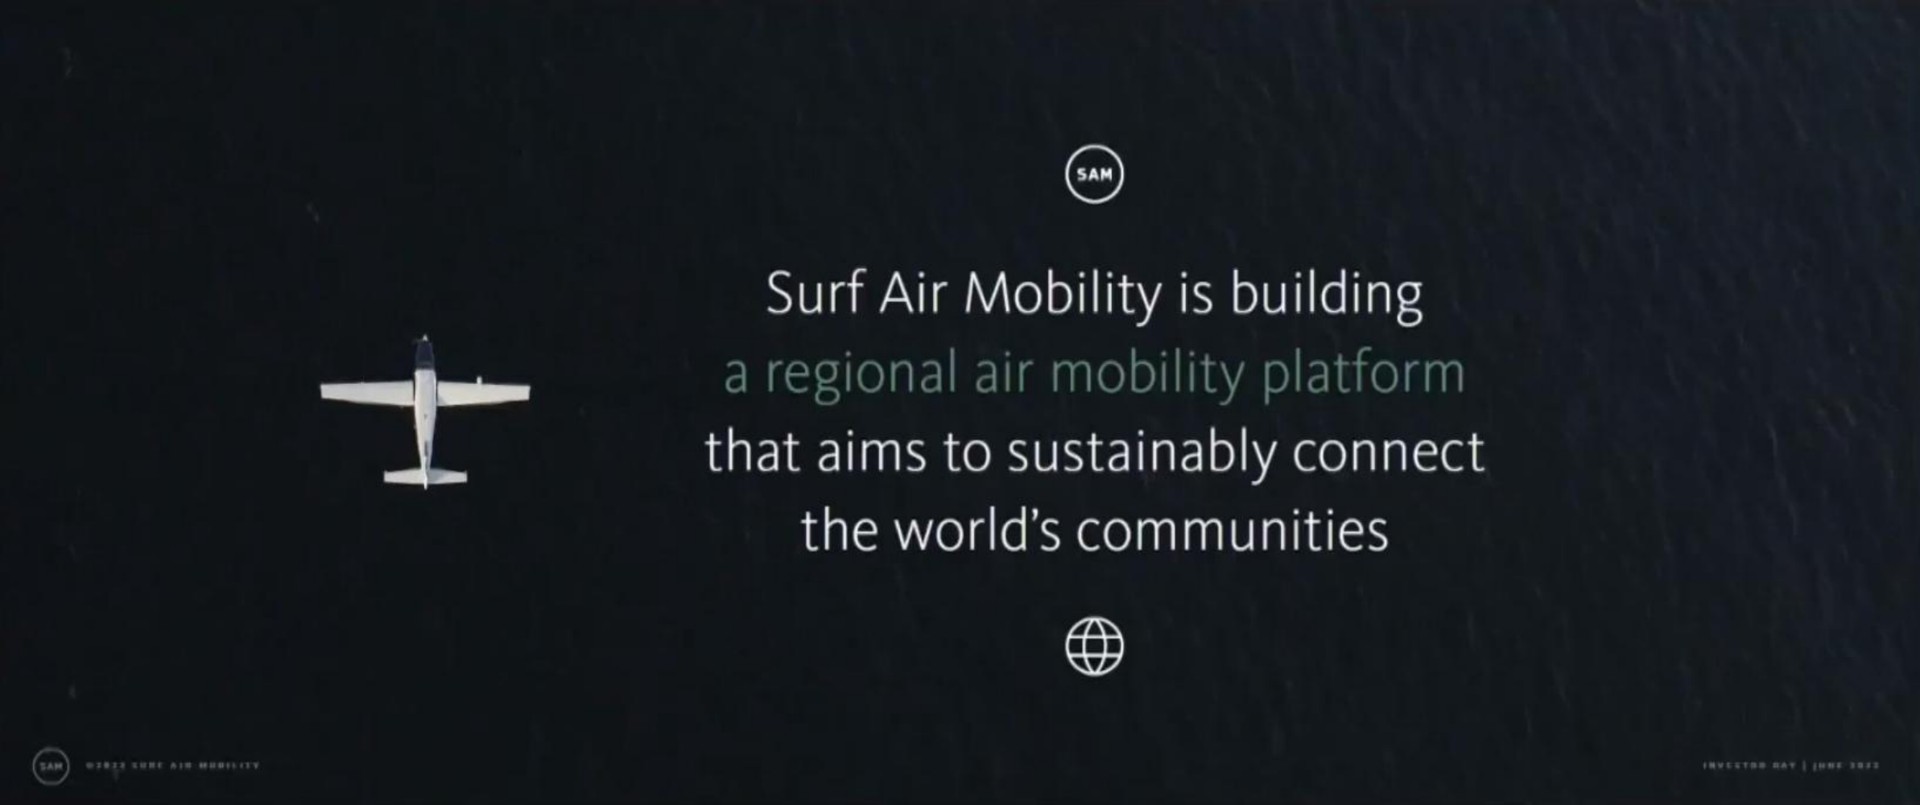 surf air mobility is building a regional air mobility platform that aims to connect the world communities | Surf Air